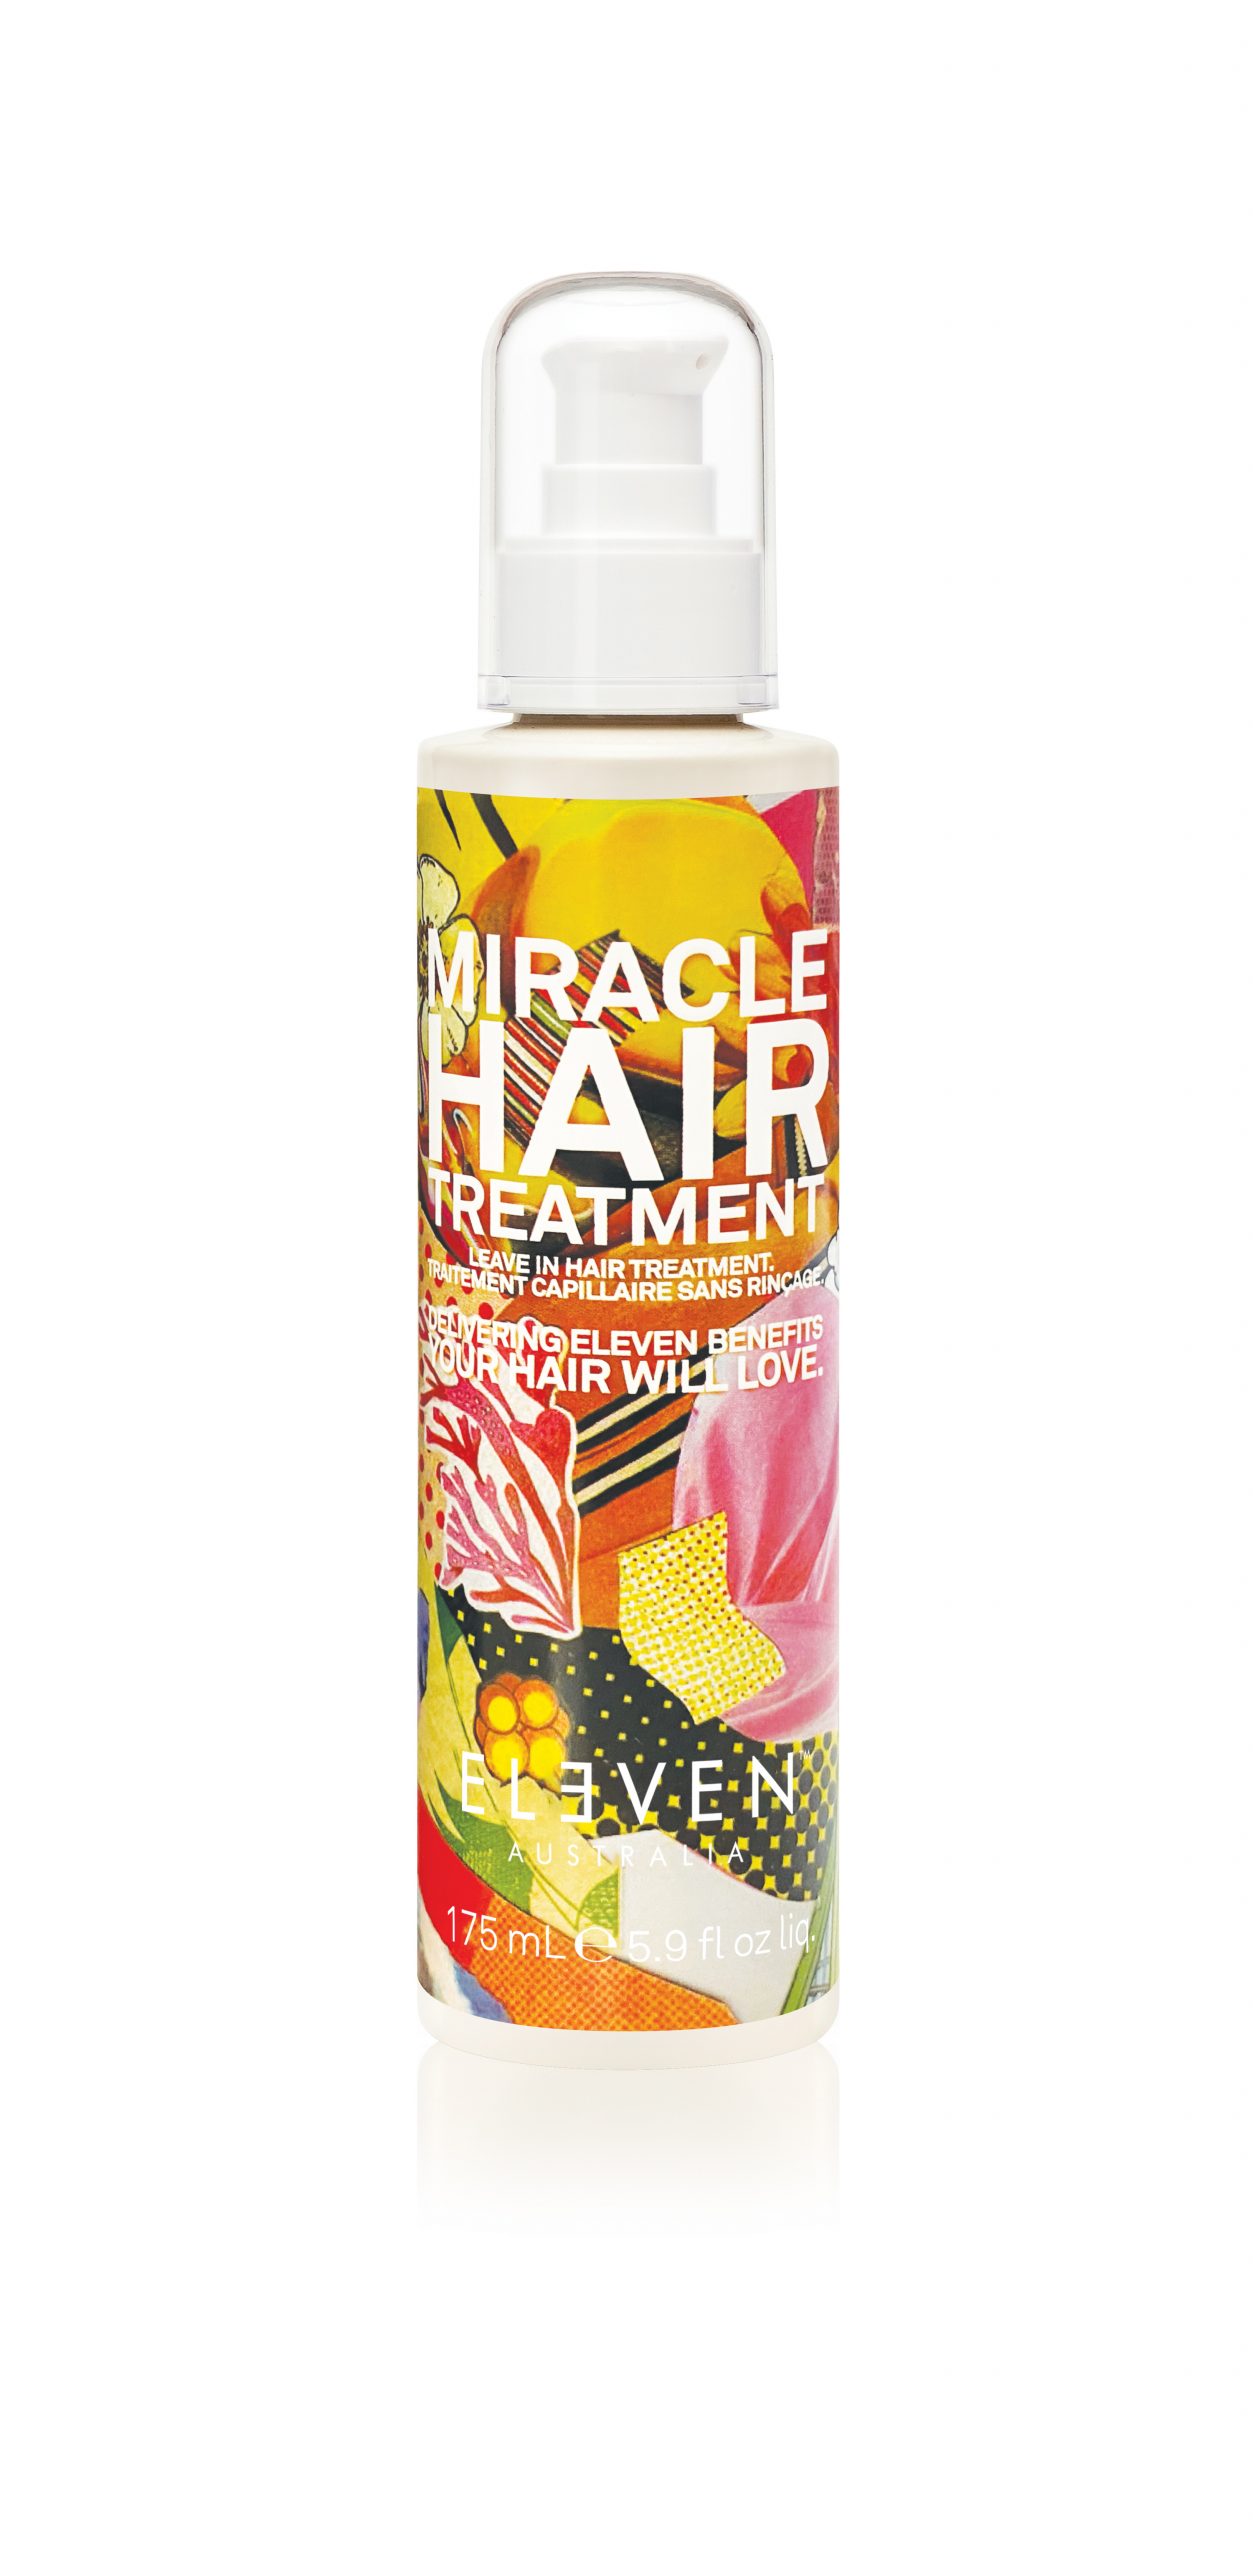 ELEVEN-Australia-Limited-Edition-Miracle-Hair-Treatment-175ml-LIGHT-PS (1)